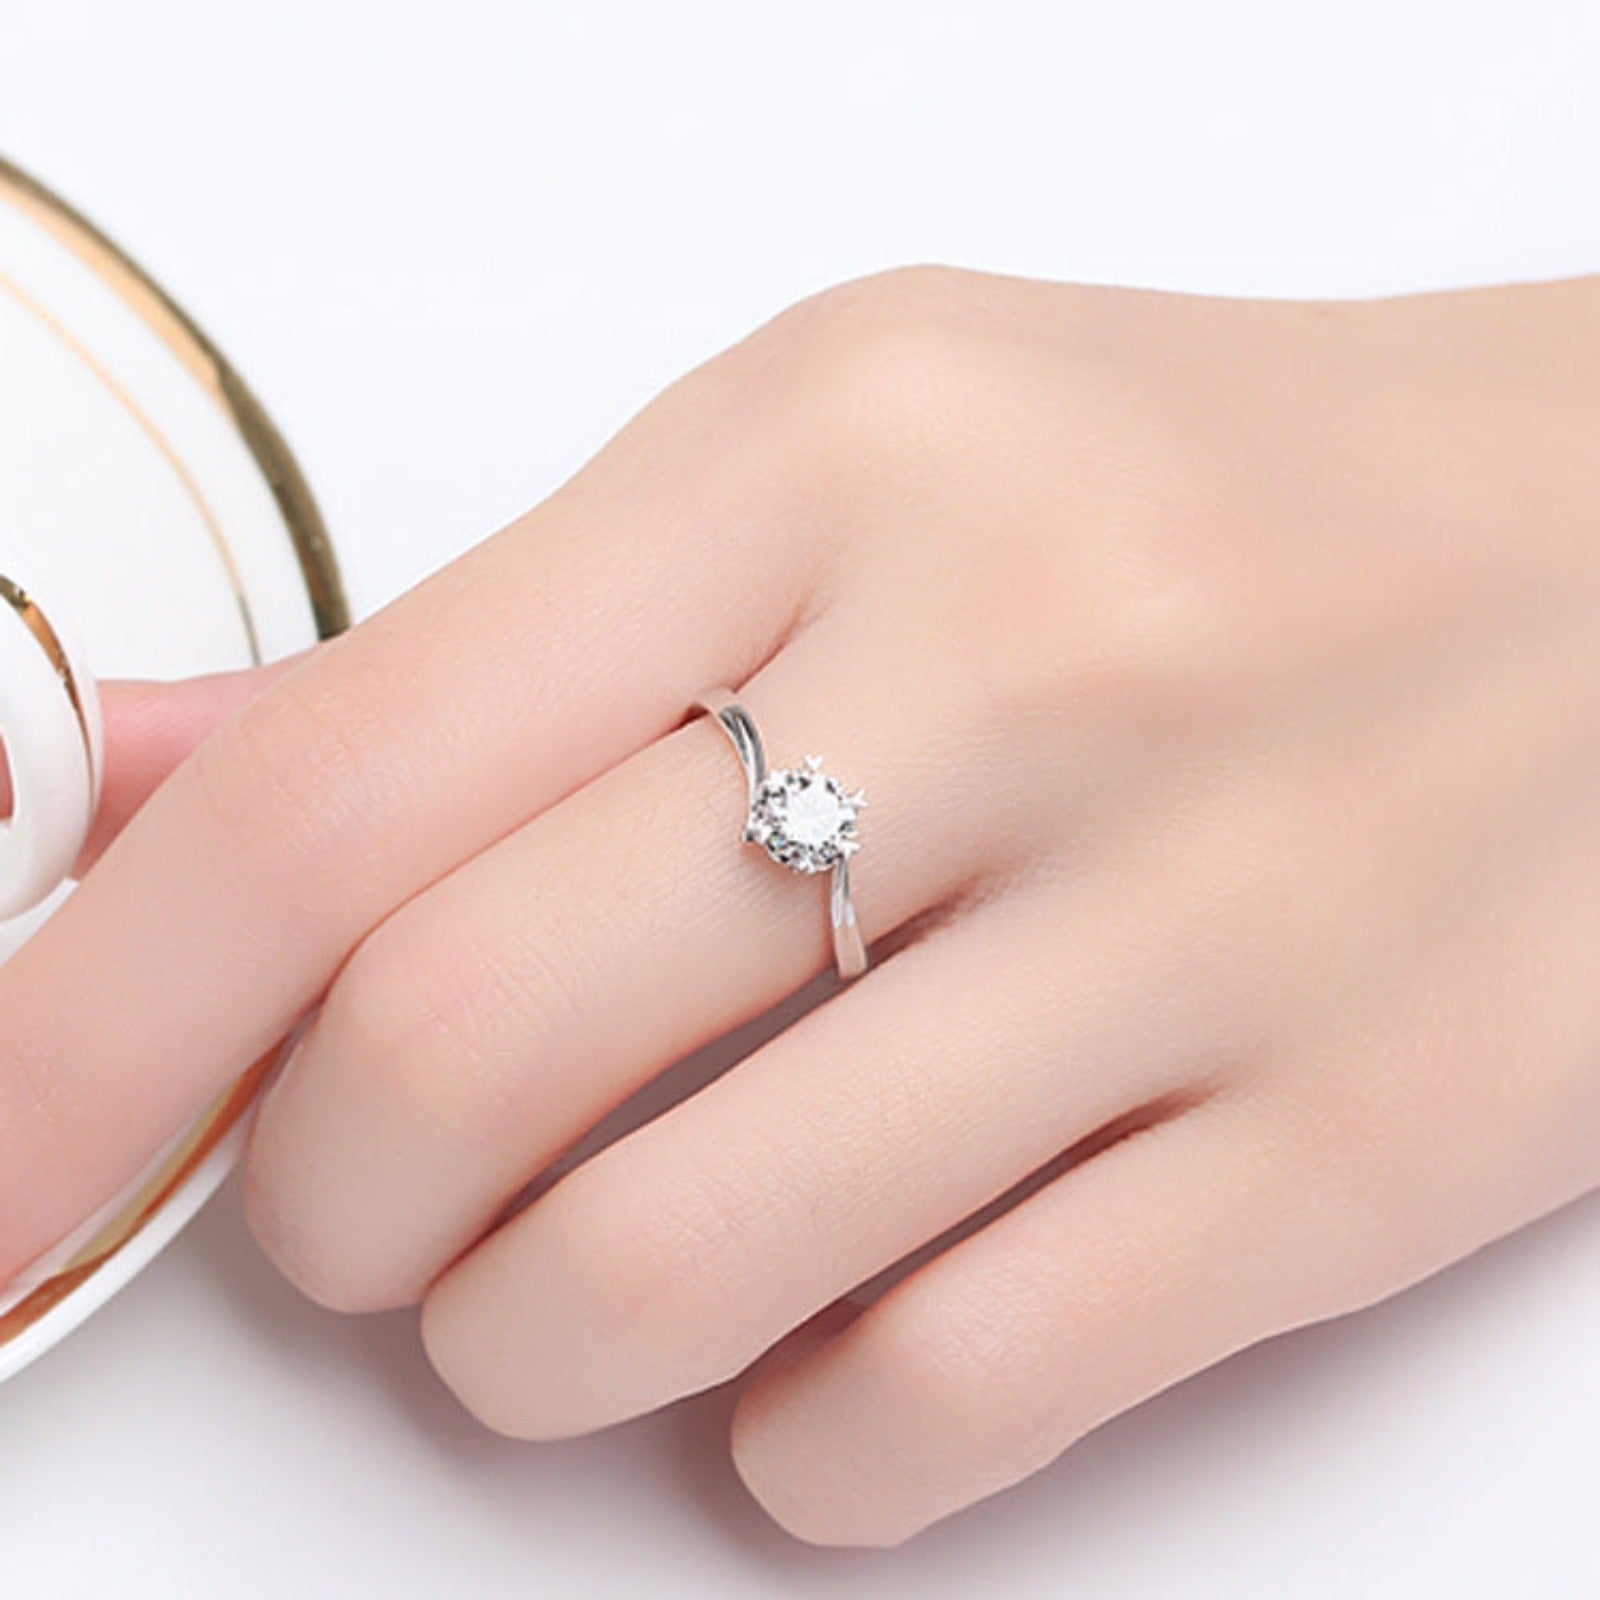 Capture her heart forever with the Timeless Snowflake: A Diamond Proposal Ring She'll Adore LA ROSE BEAUTY